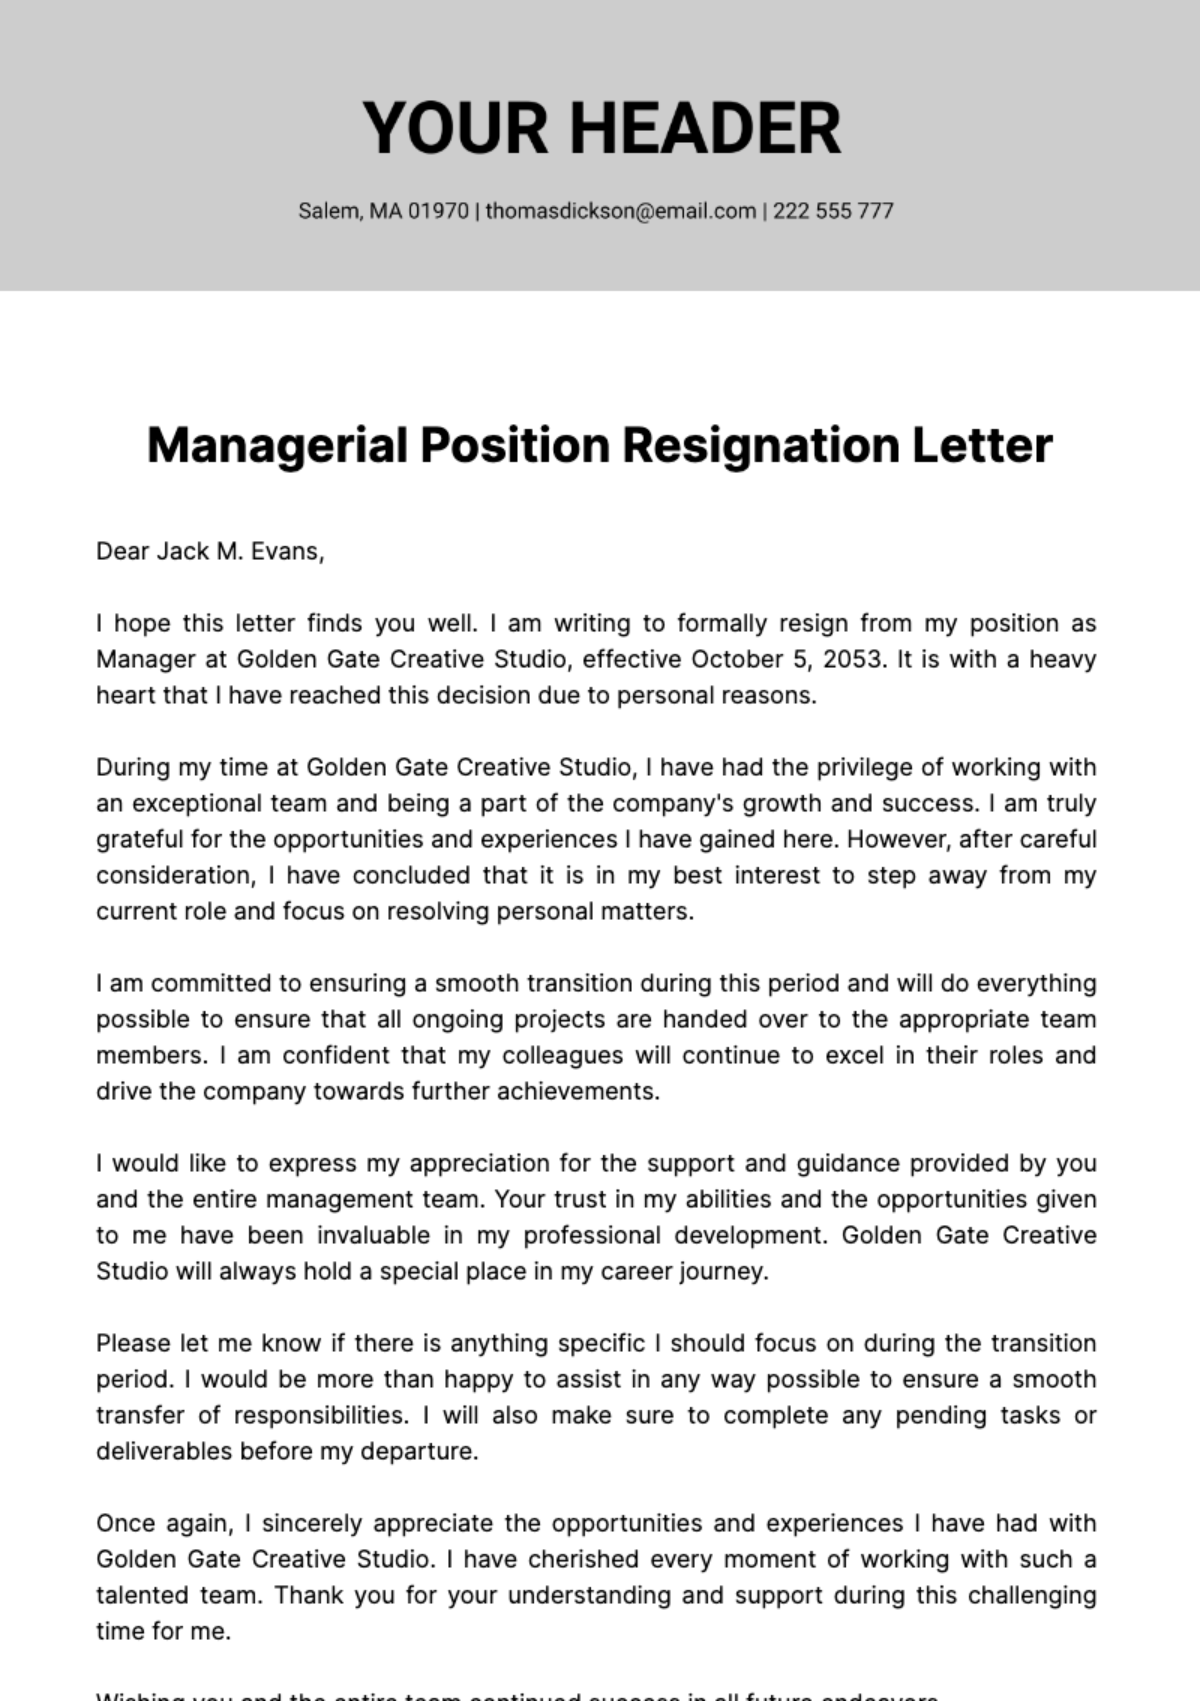 Free Managerial Position Resignation Letter  Template